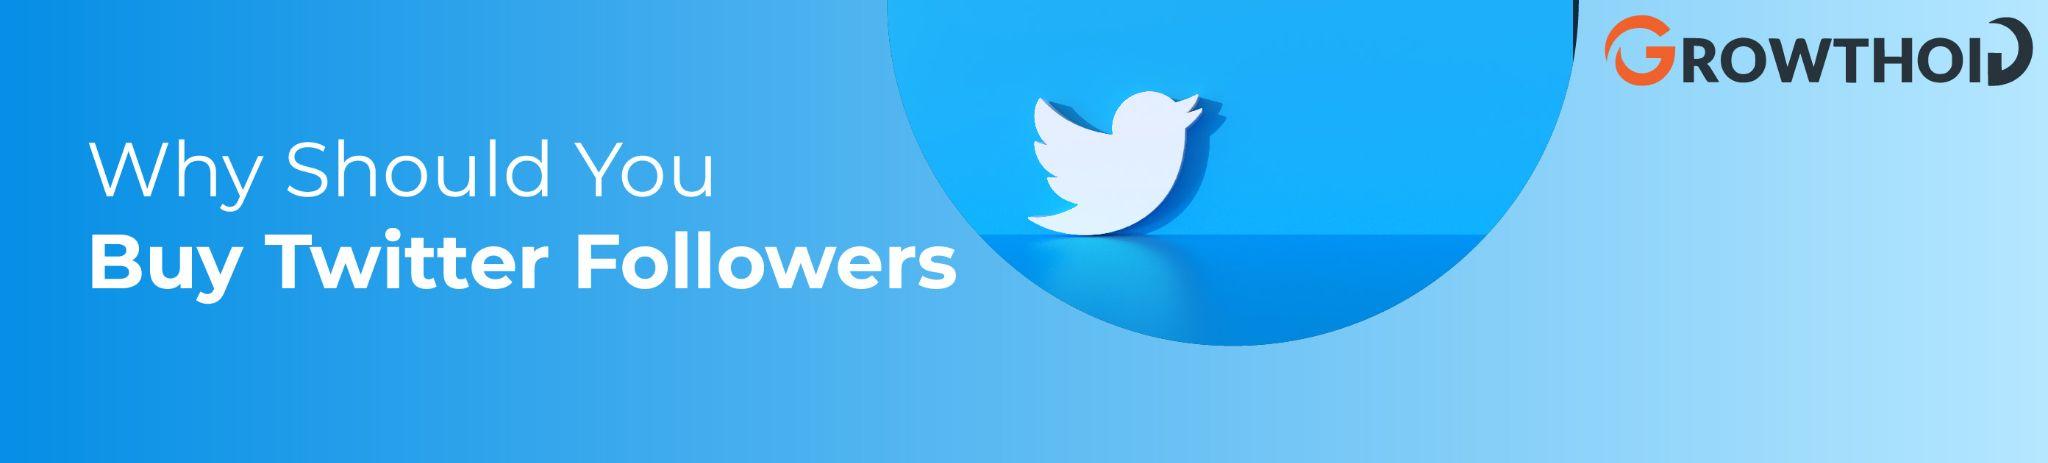 Why Should You Buy Twitter Followers